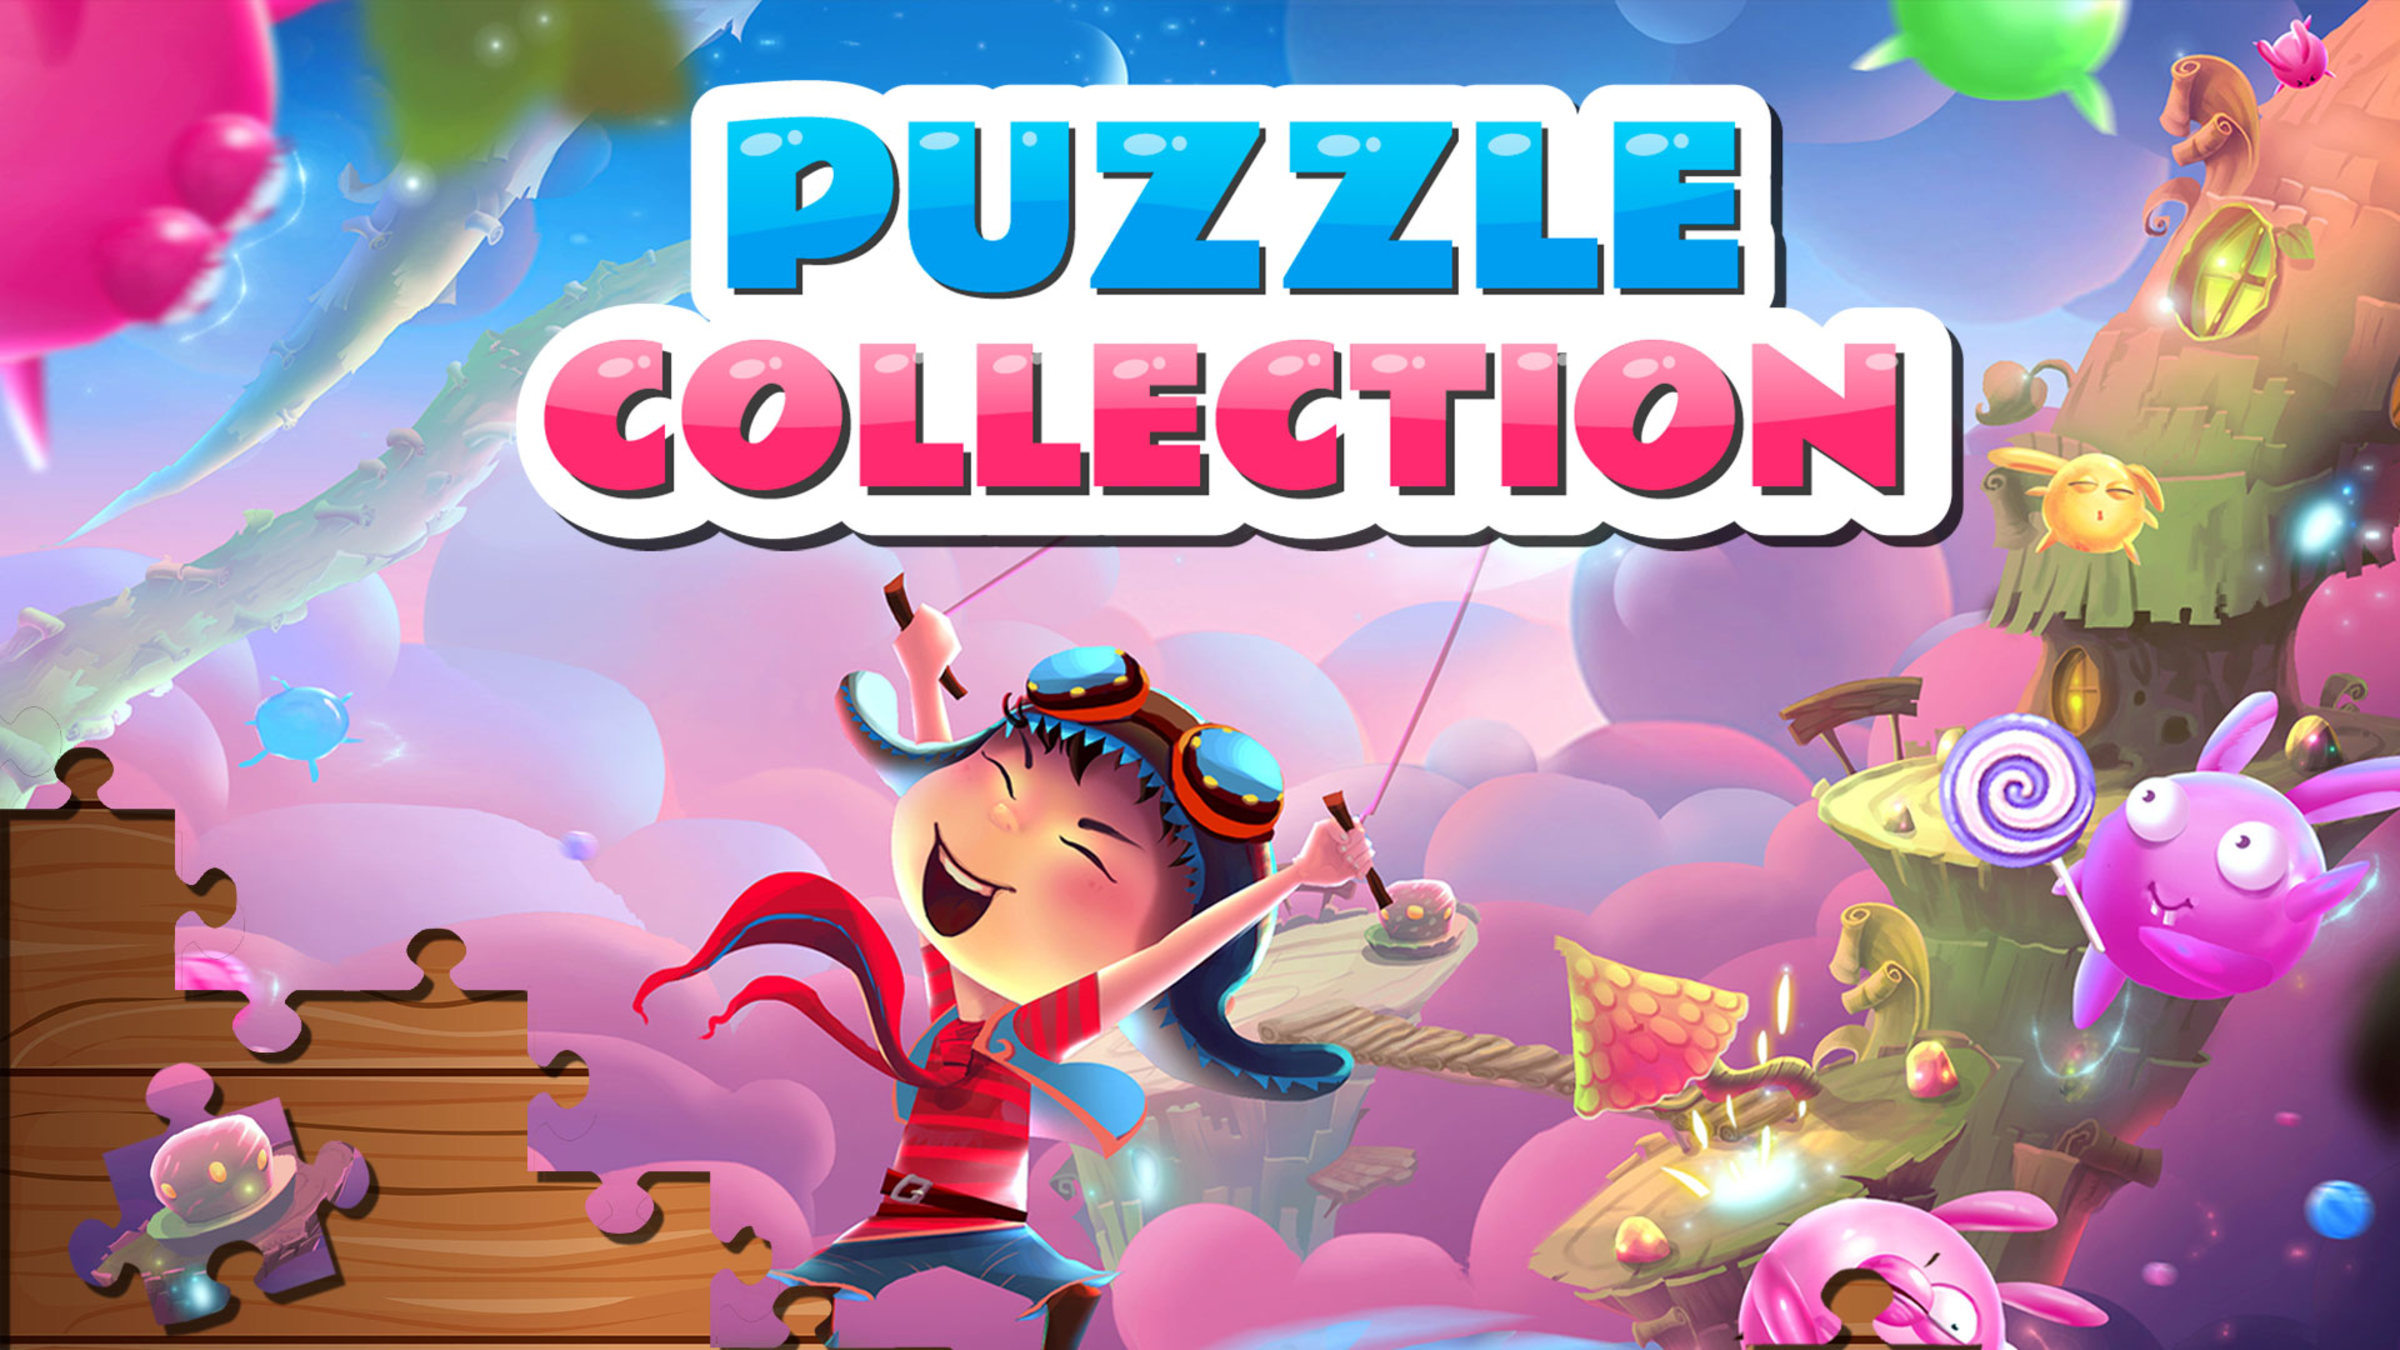 Endless Puzzle Fun Collection for Nintendo Switch - Nintendo Official Site